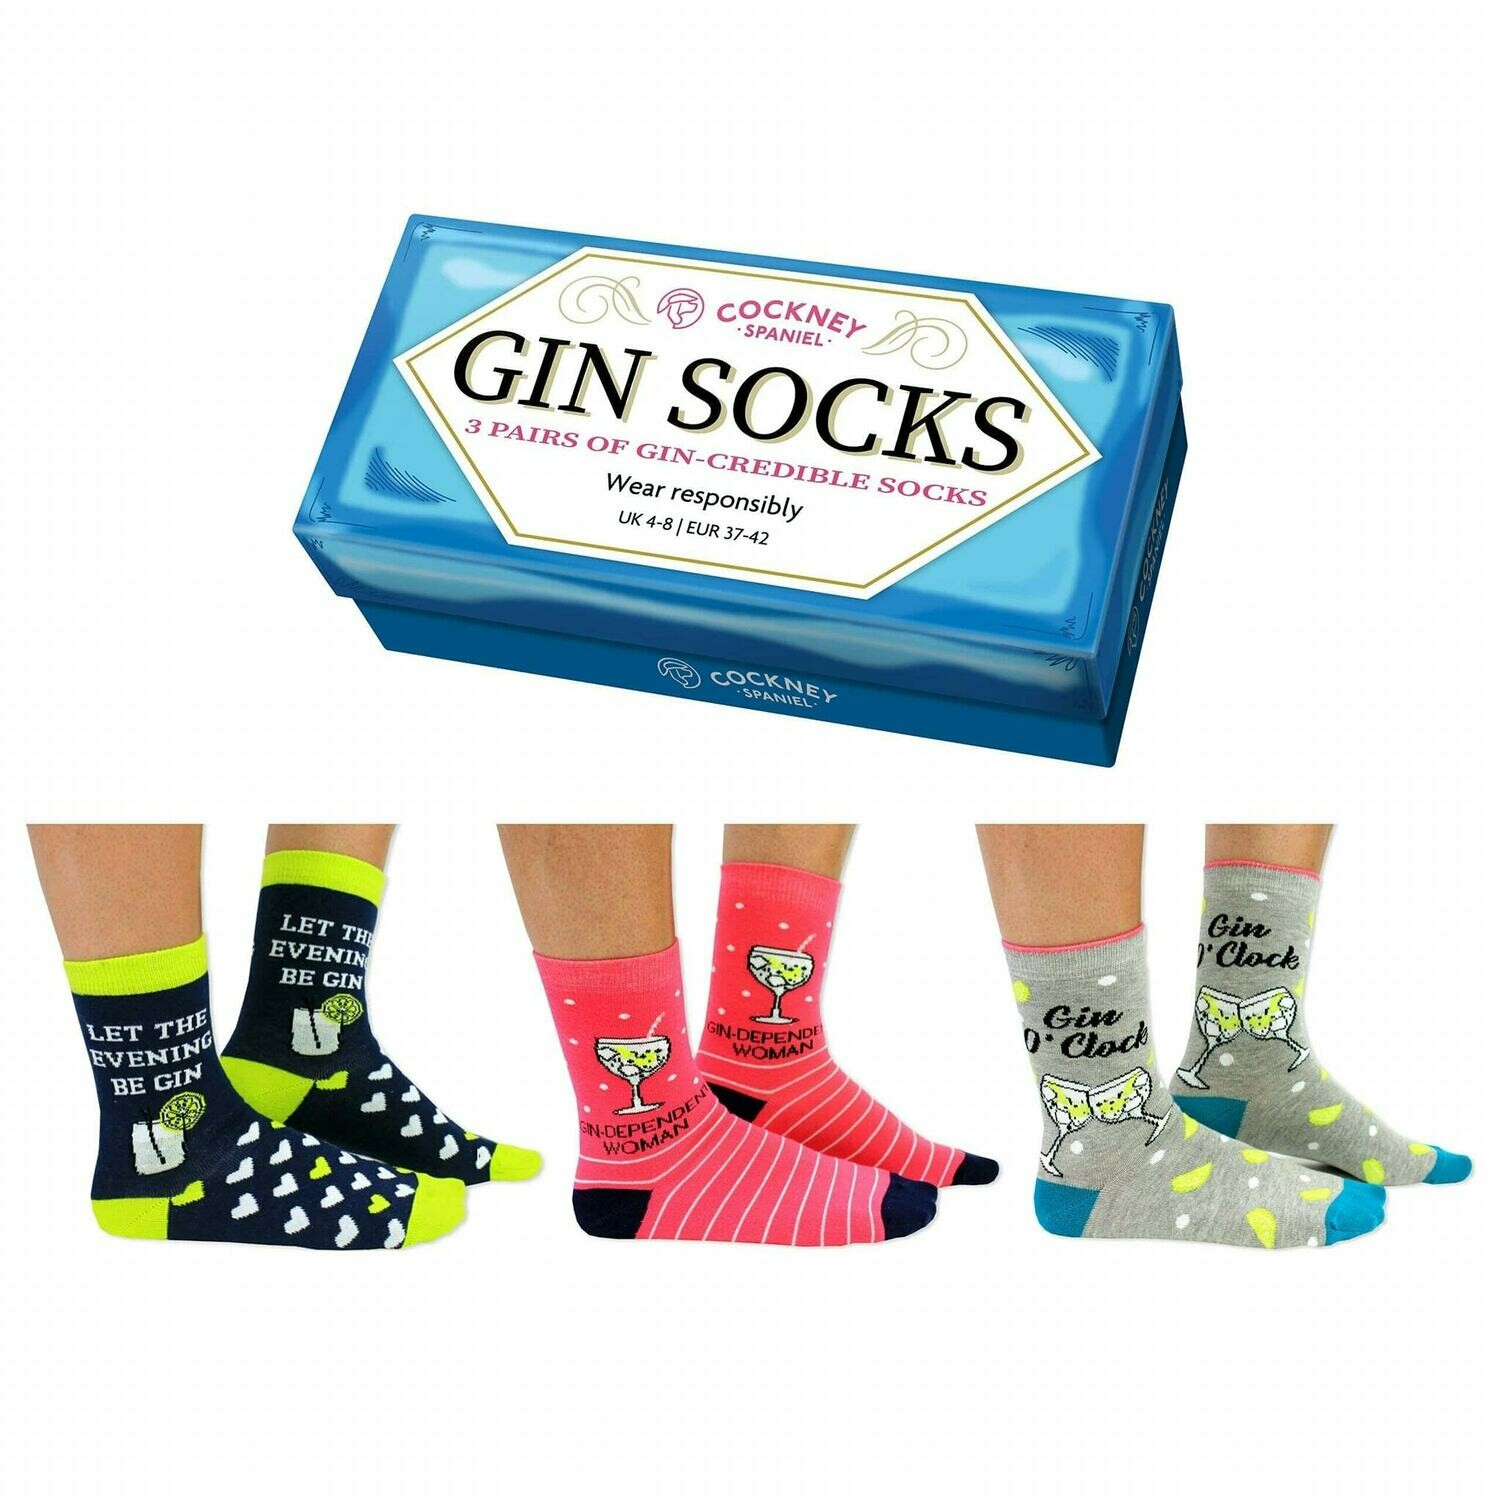 3 Pairs Of Cockney Spaniel Gift Boxed Ladies Gin Socks Size 4-8